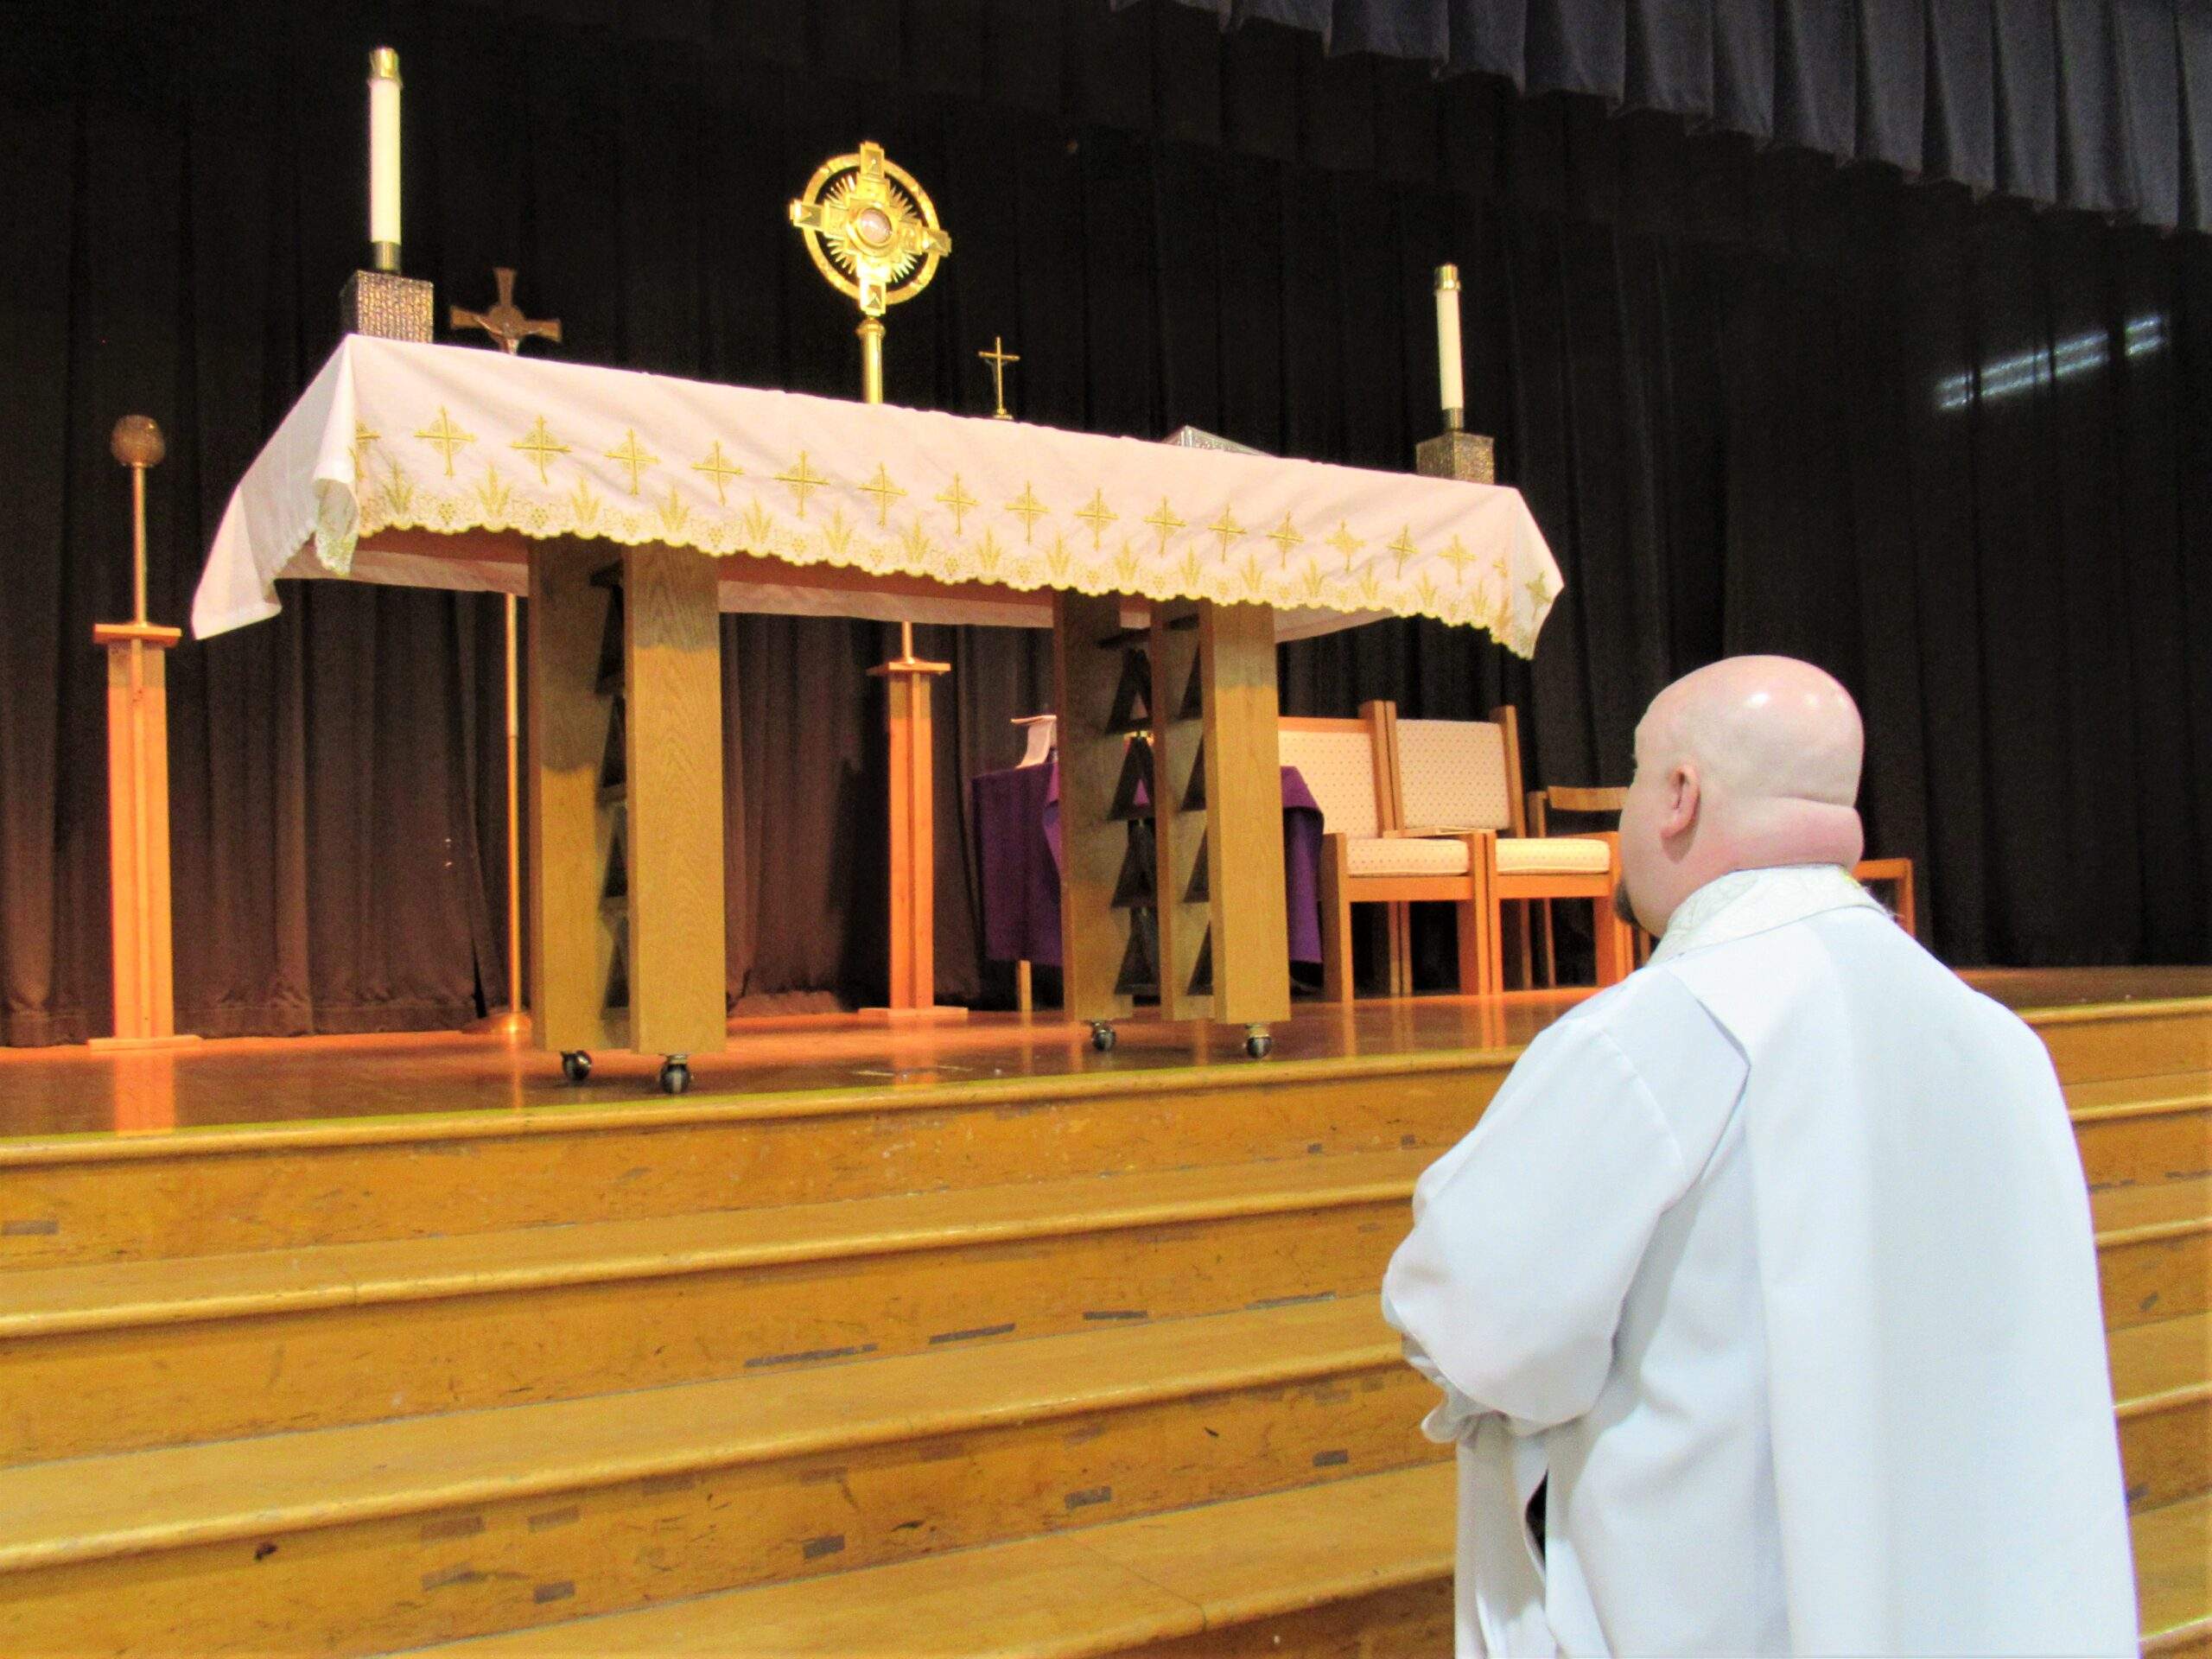 Father Ryan Furlong prays before the monstrance with the Blessed Sacrament on the altar during adoration at the Youngstown Catholic Men's Fellowship Conference March 25 at Warren John F. Kennedy High School.